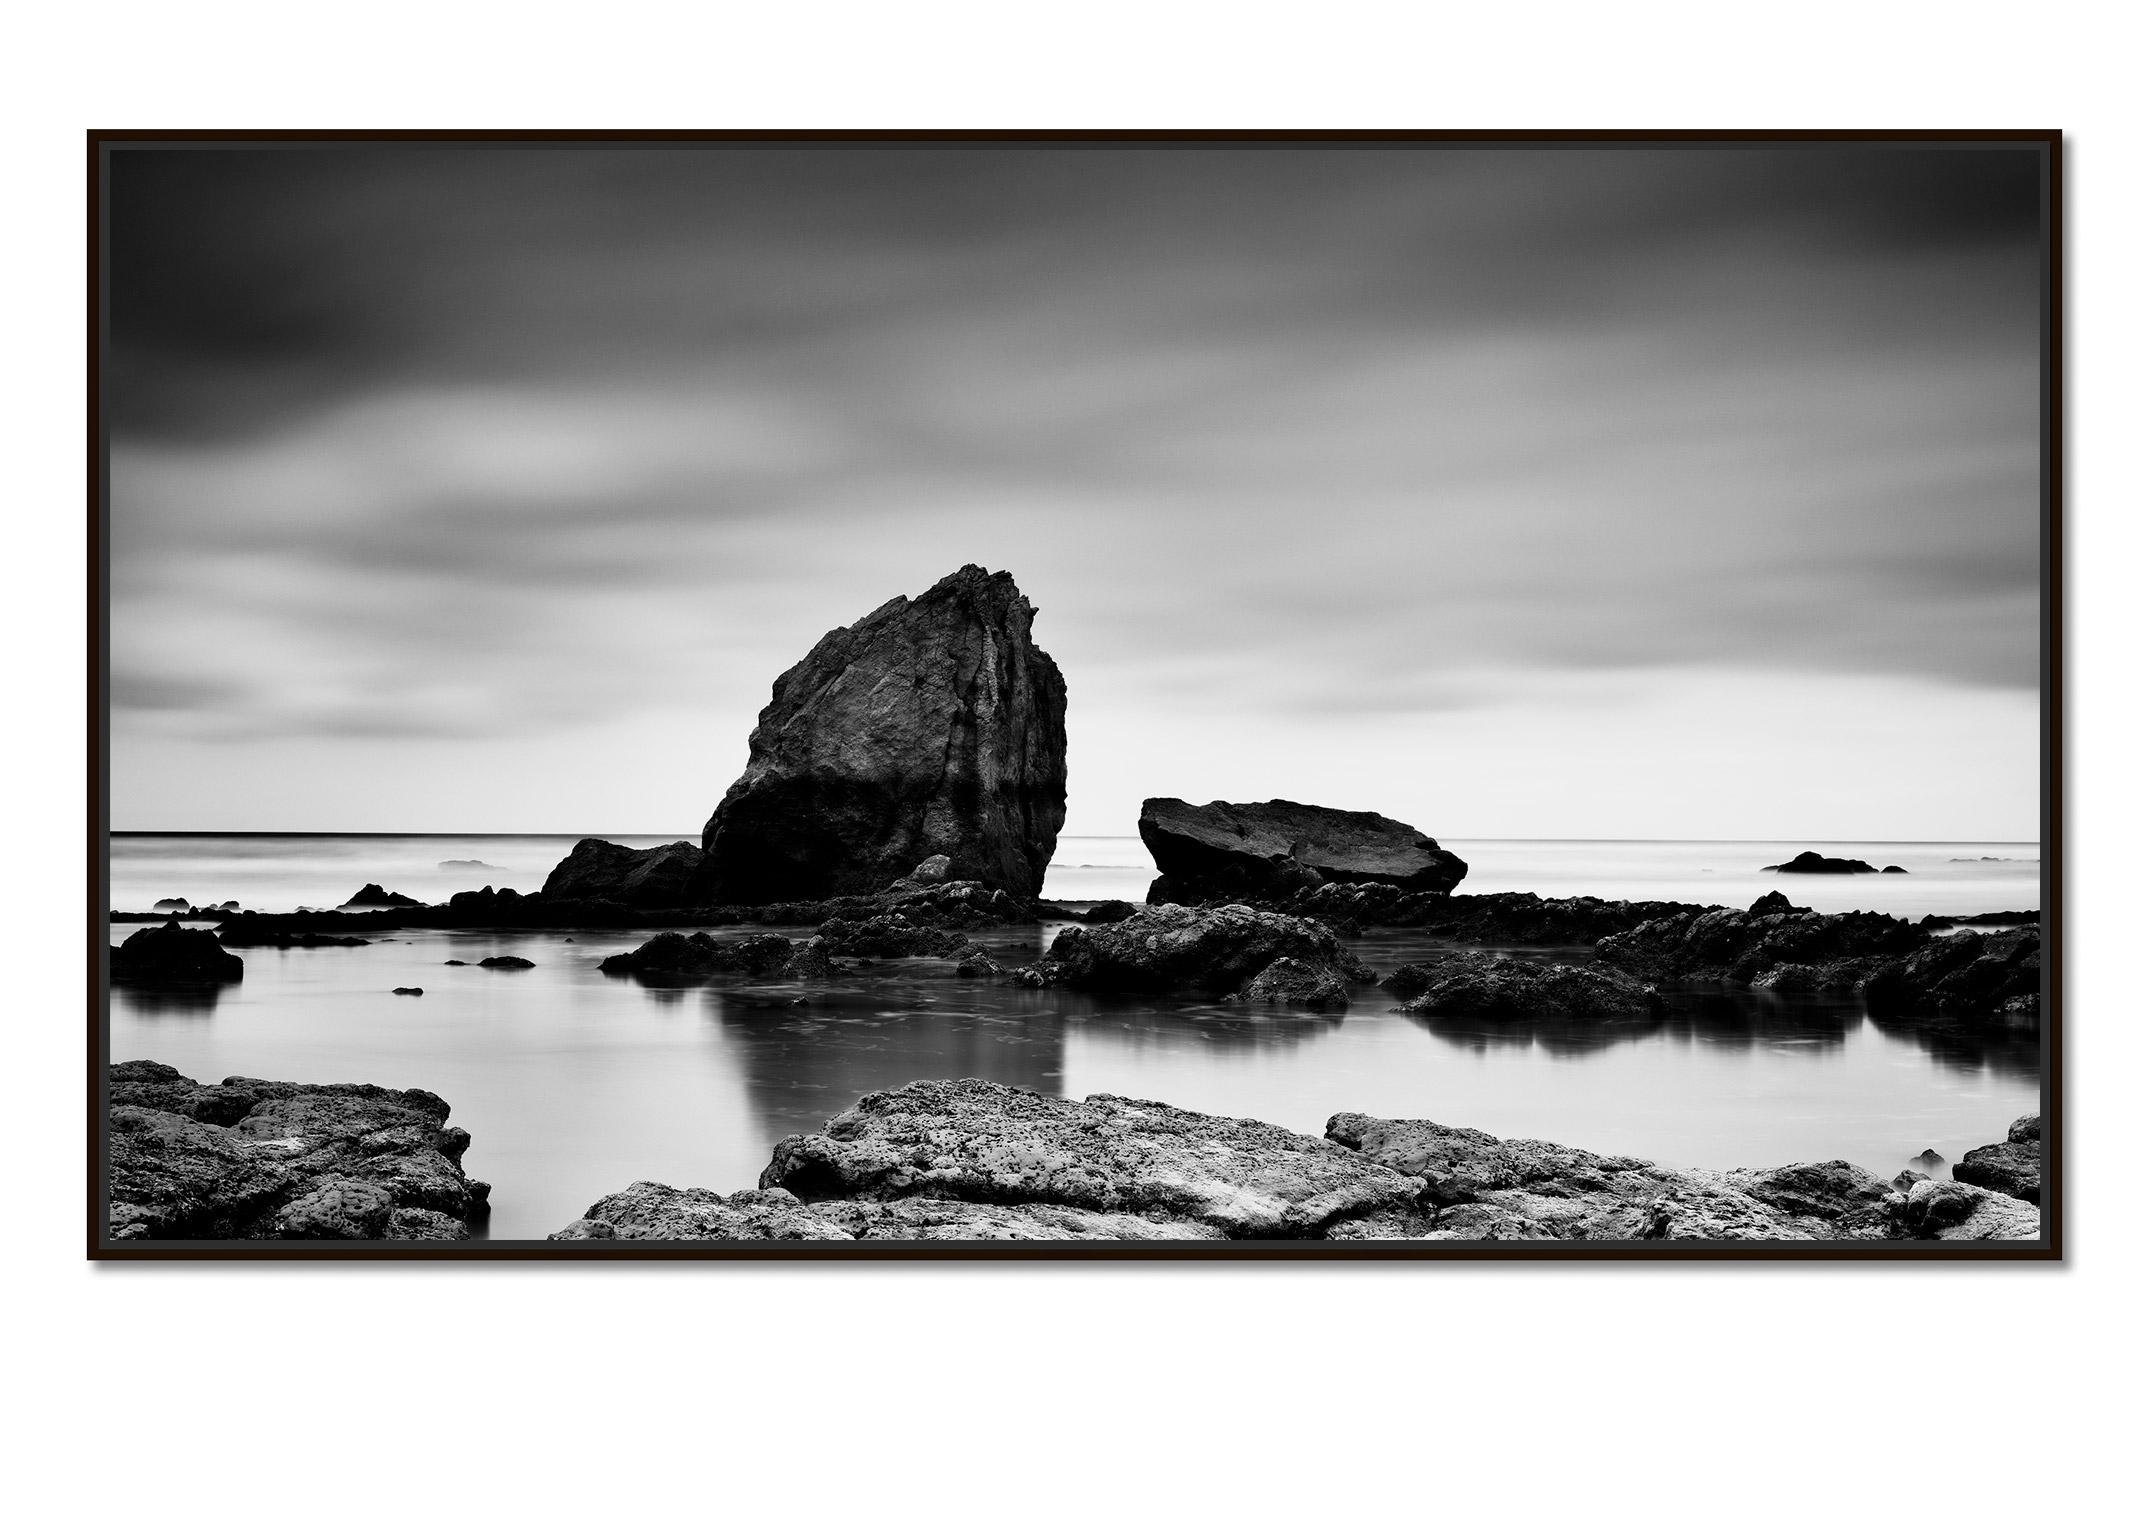 Beach Rock Panorama, Shoreline, France, black and white landscape photography - Photograph by Gerald Berghammer